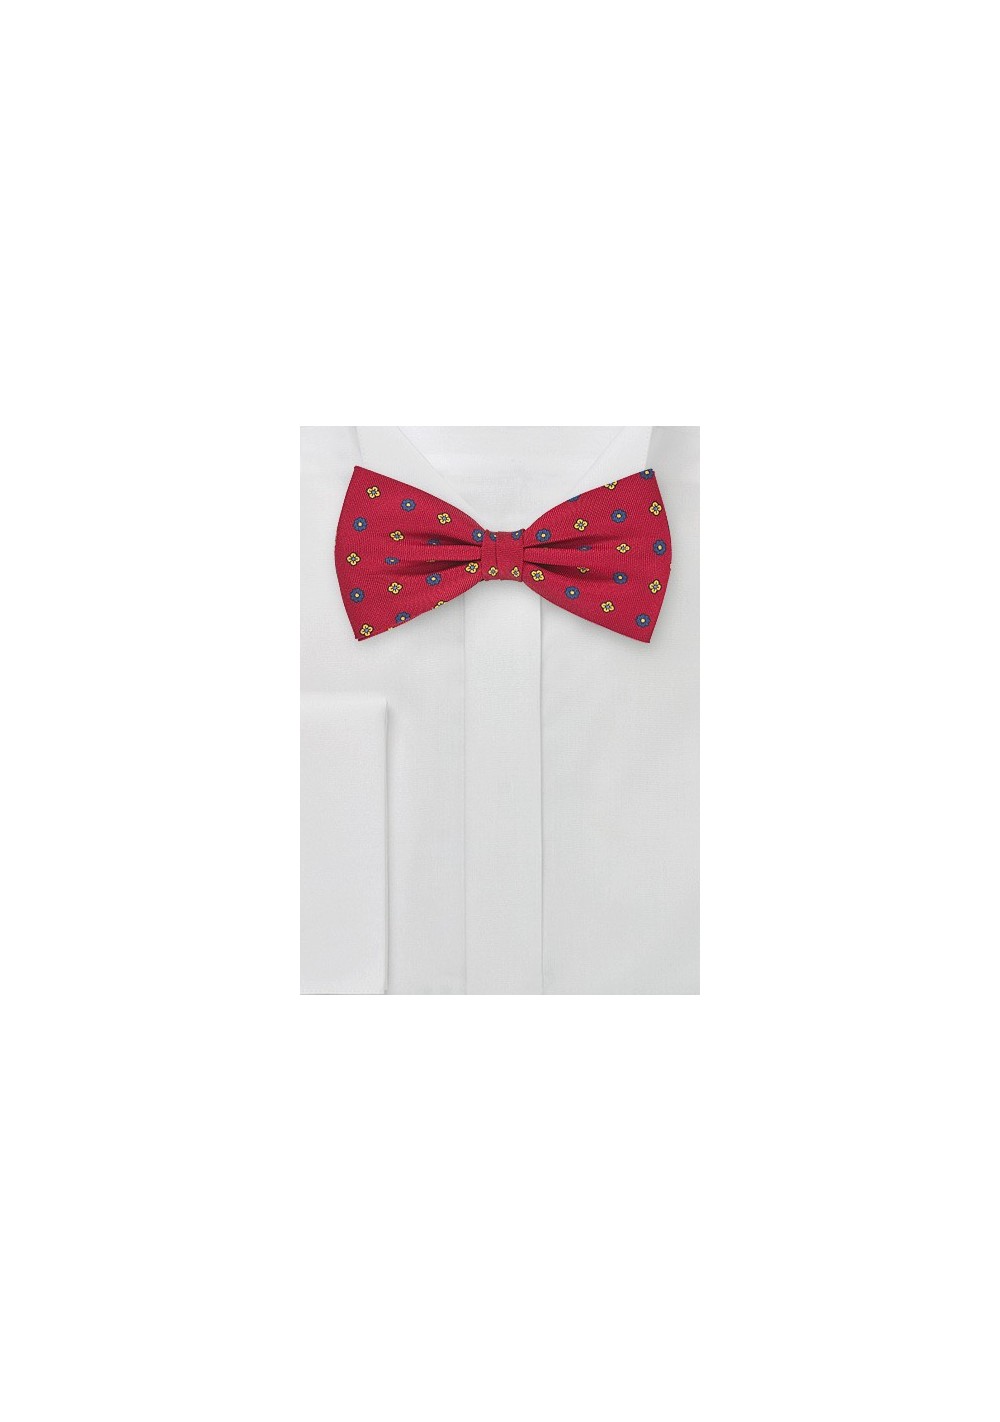 Geometric Floral Patterned Bow Tie